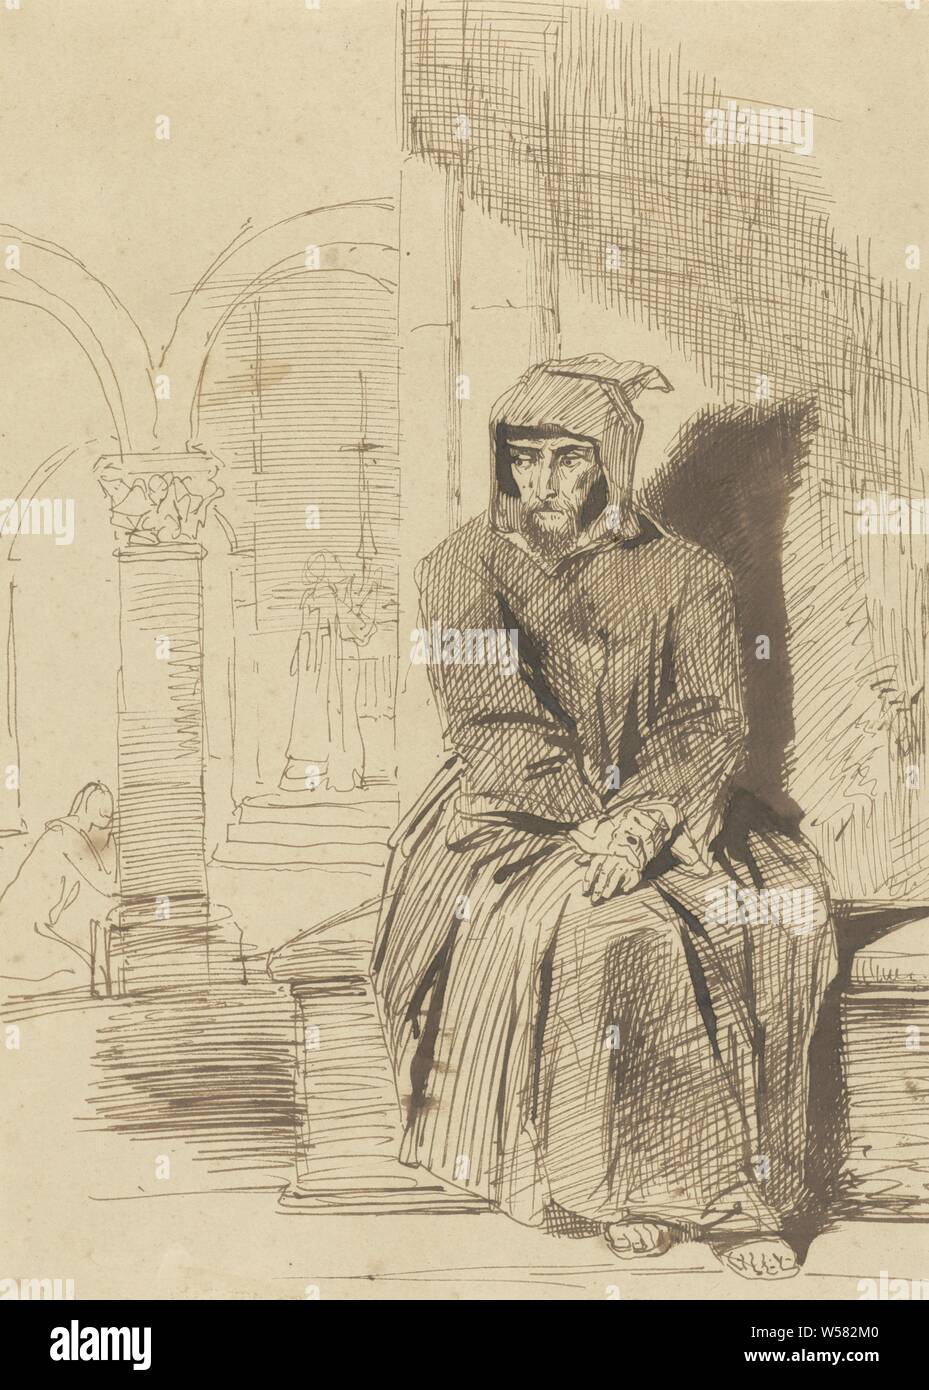 Seated monk, in contemplation, while mass is being celebrated in the background, Louis Boulanger, 1816 - 1867, paper, ink, brush, h 262 mm × w 190 mm Stock Photo